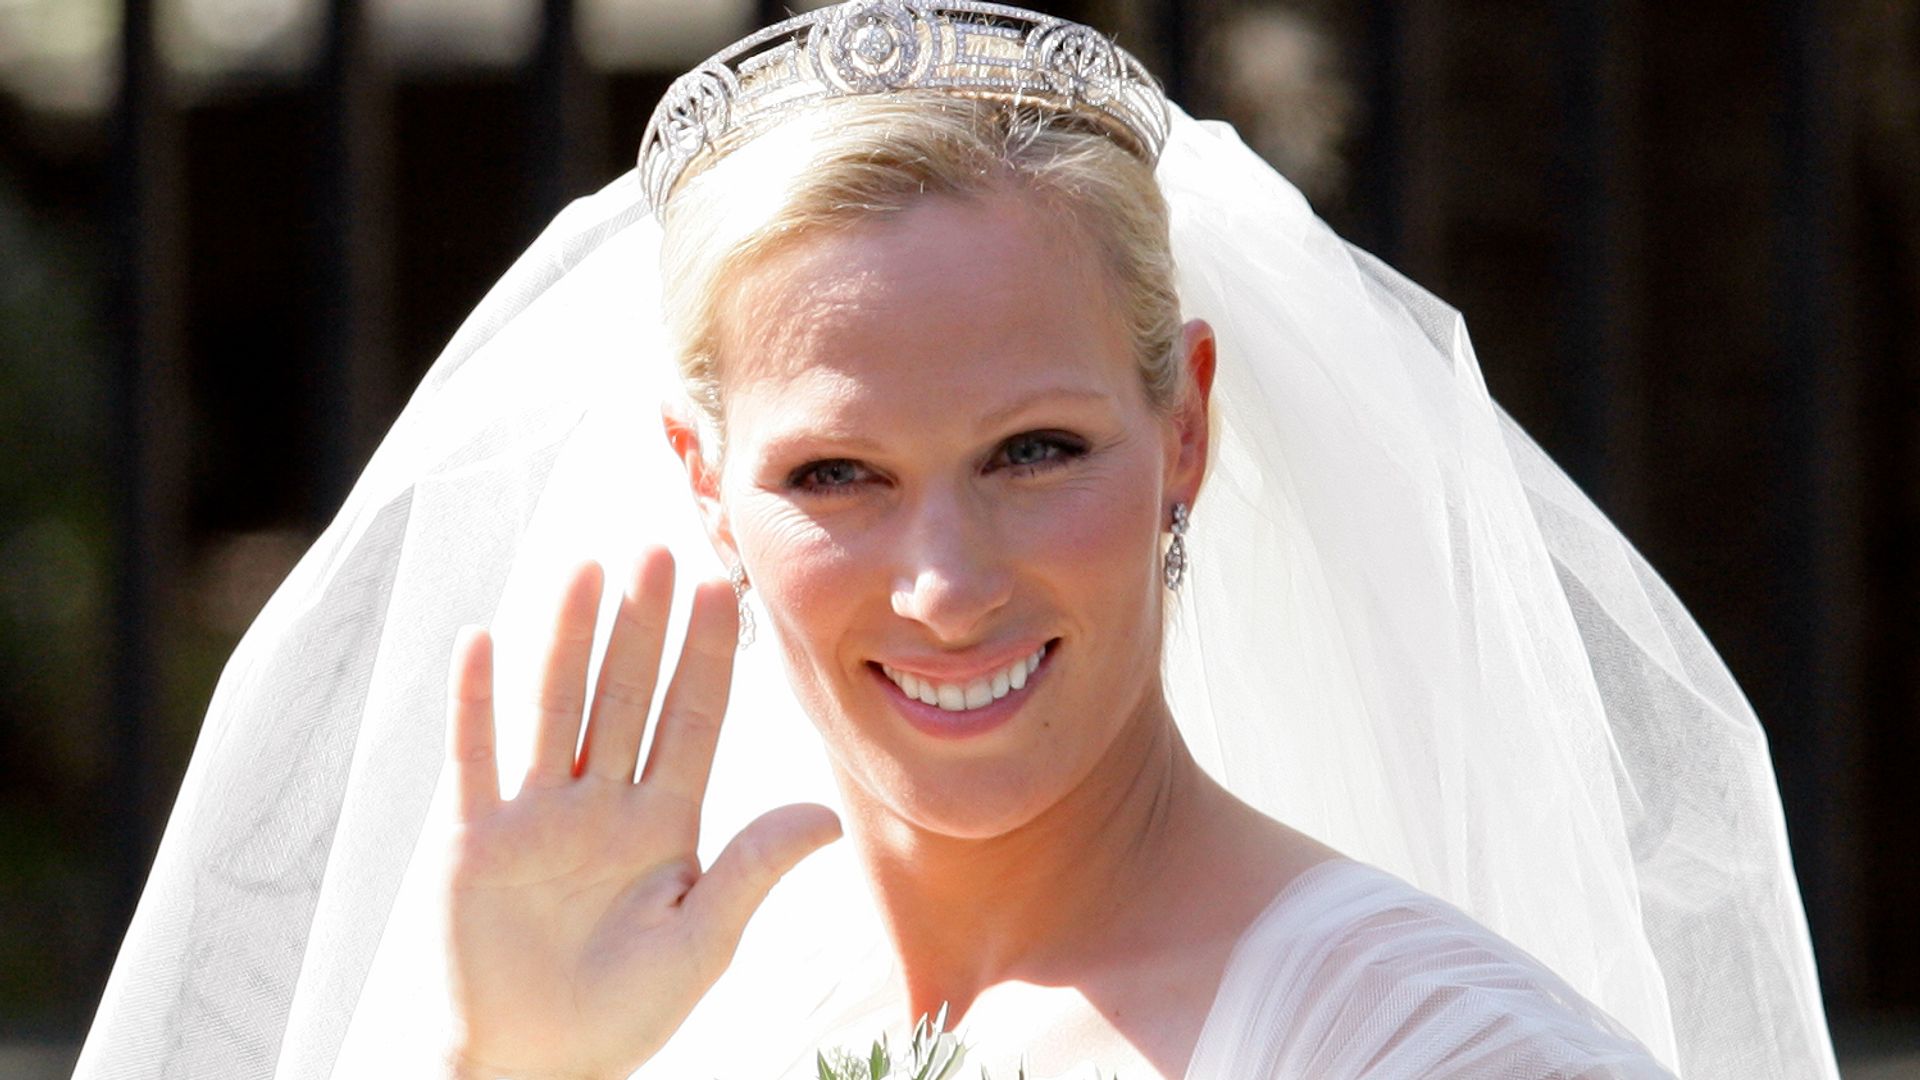 Zara Phillips waves to the crowds as she leaves Canongate Kirk after her wedding to Mike Tindall